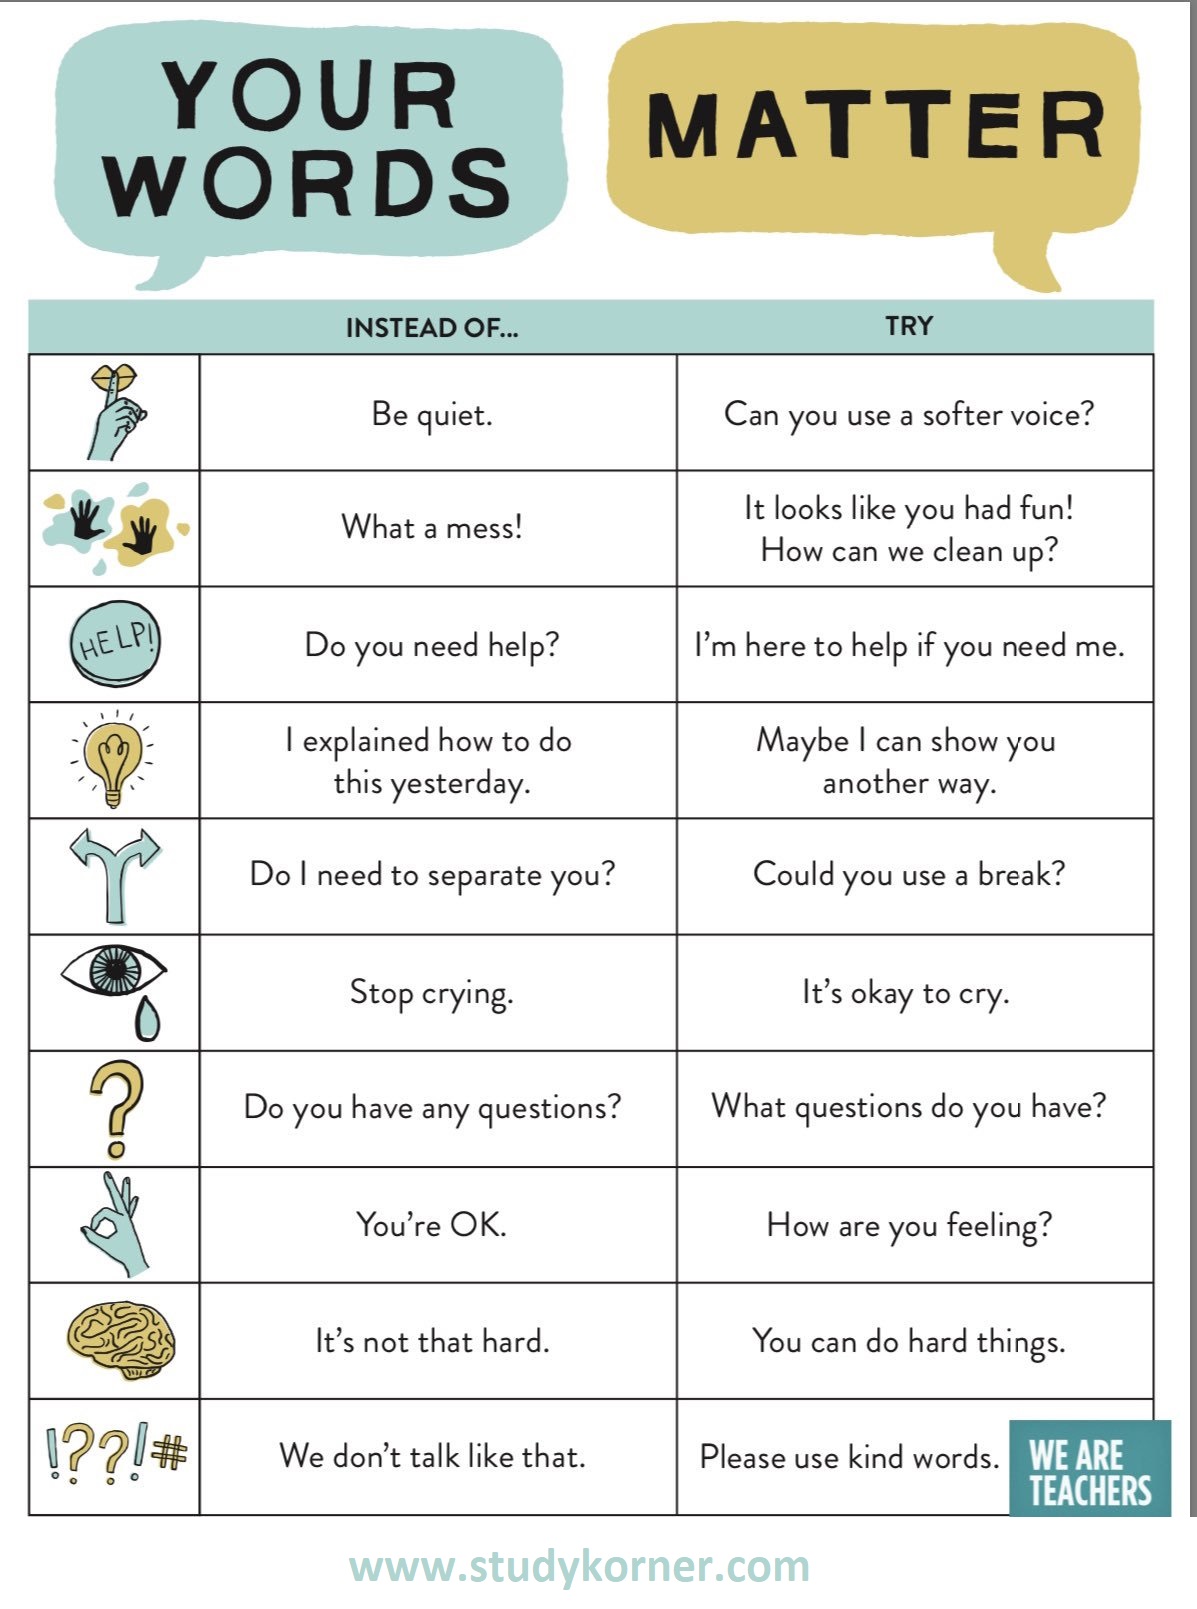 How to Bring More Positive Language Into Your Classroom